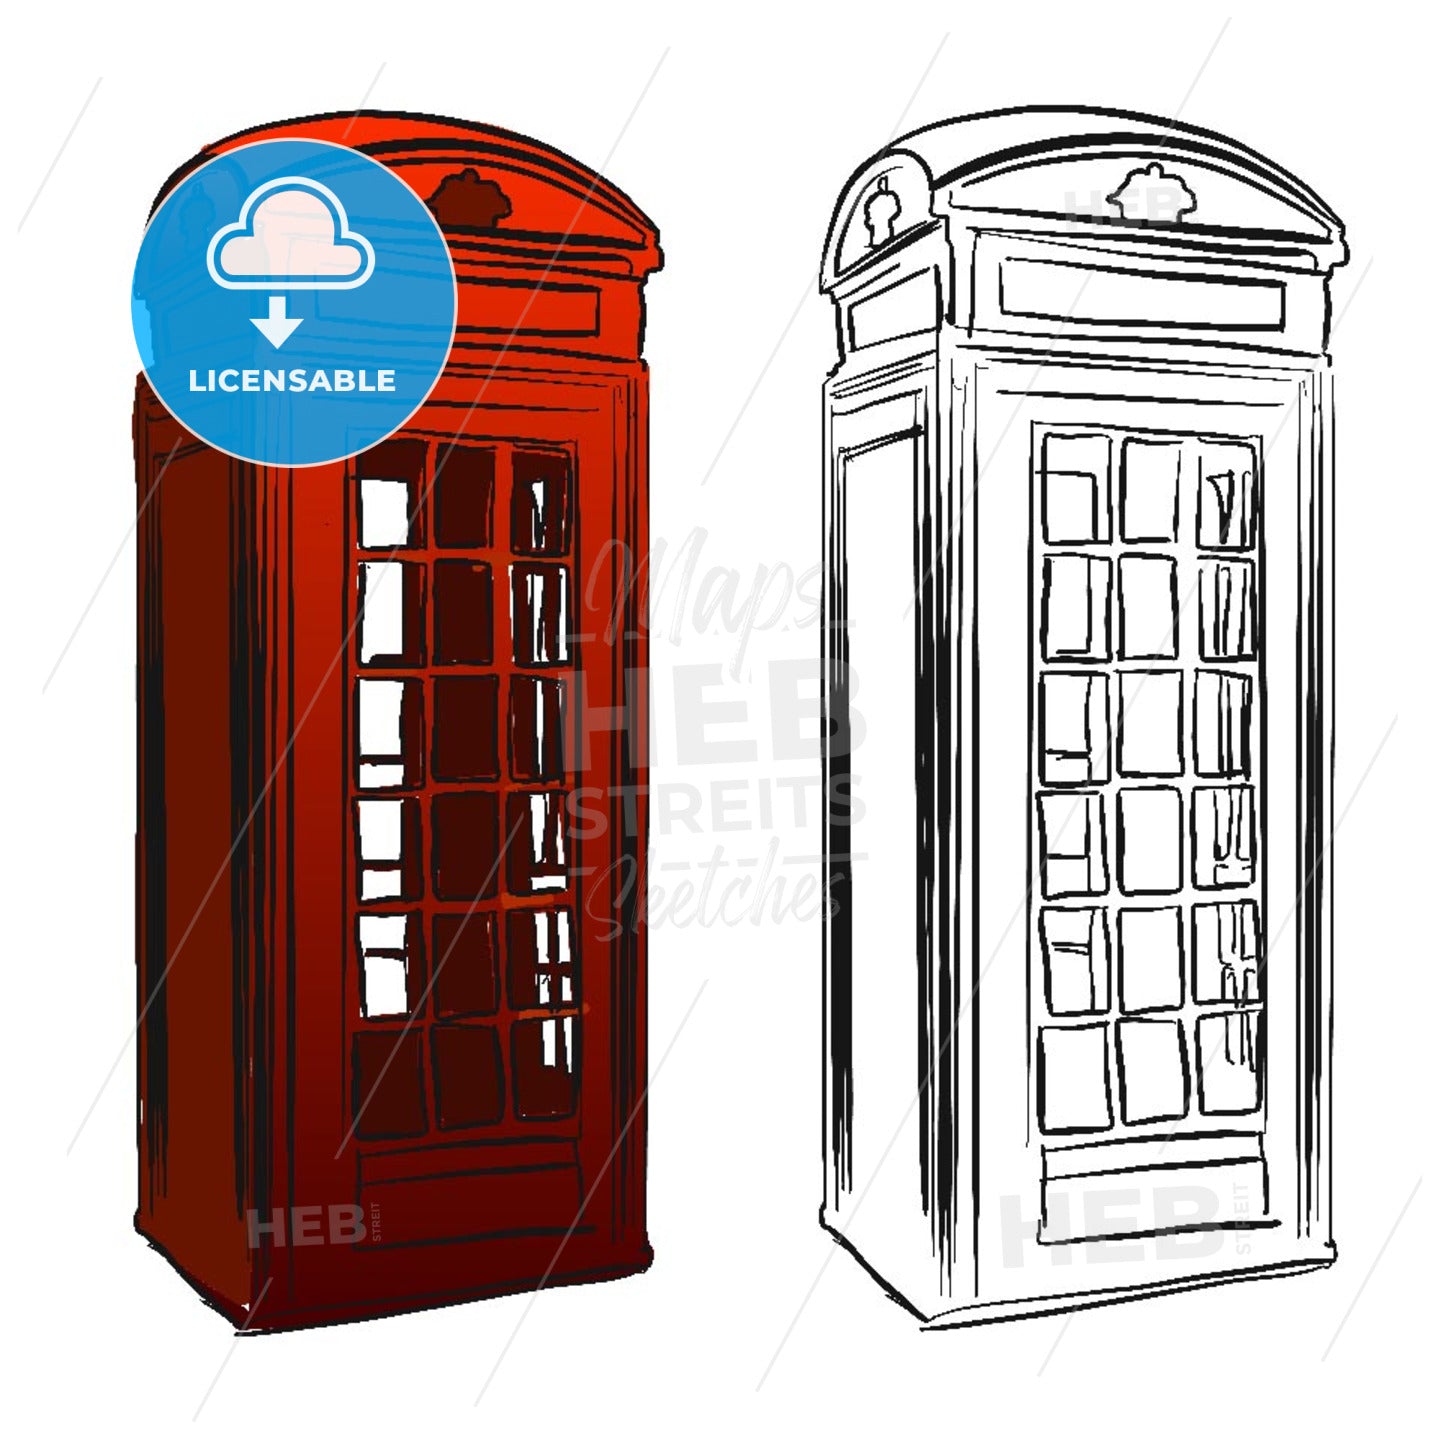 London Old Telephone Box Sketch – instant download